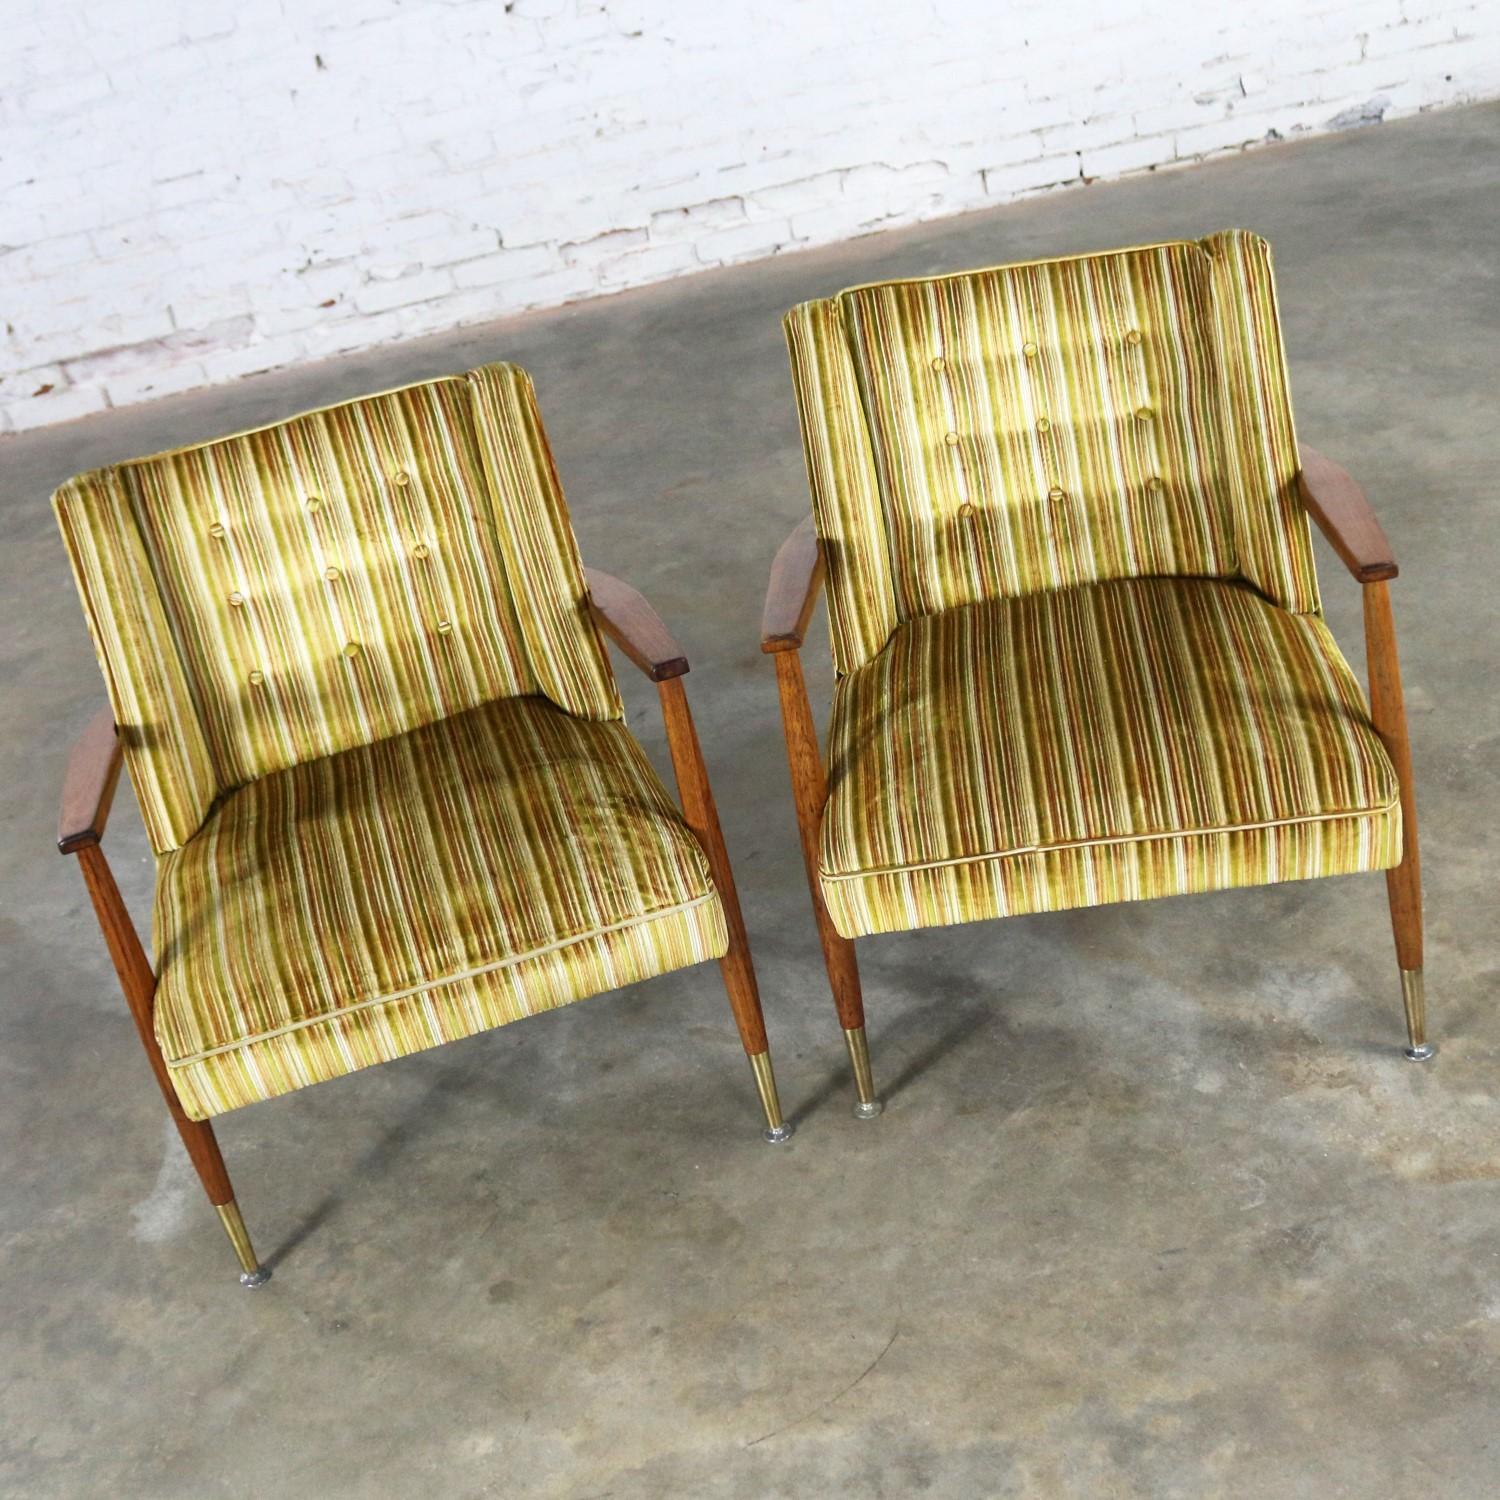 American Mid-Century Modern Pair of Lounge Chairs with Teak Arms and Legs & Brass Sabots